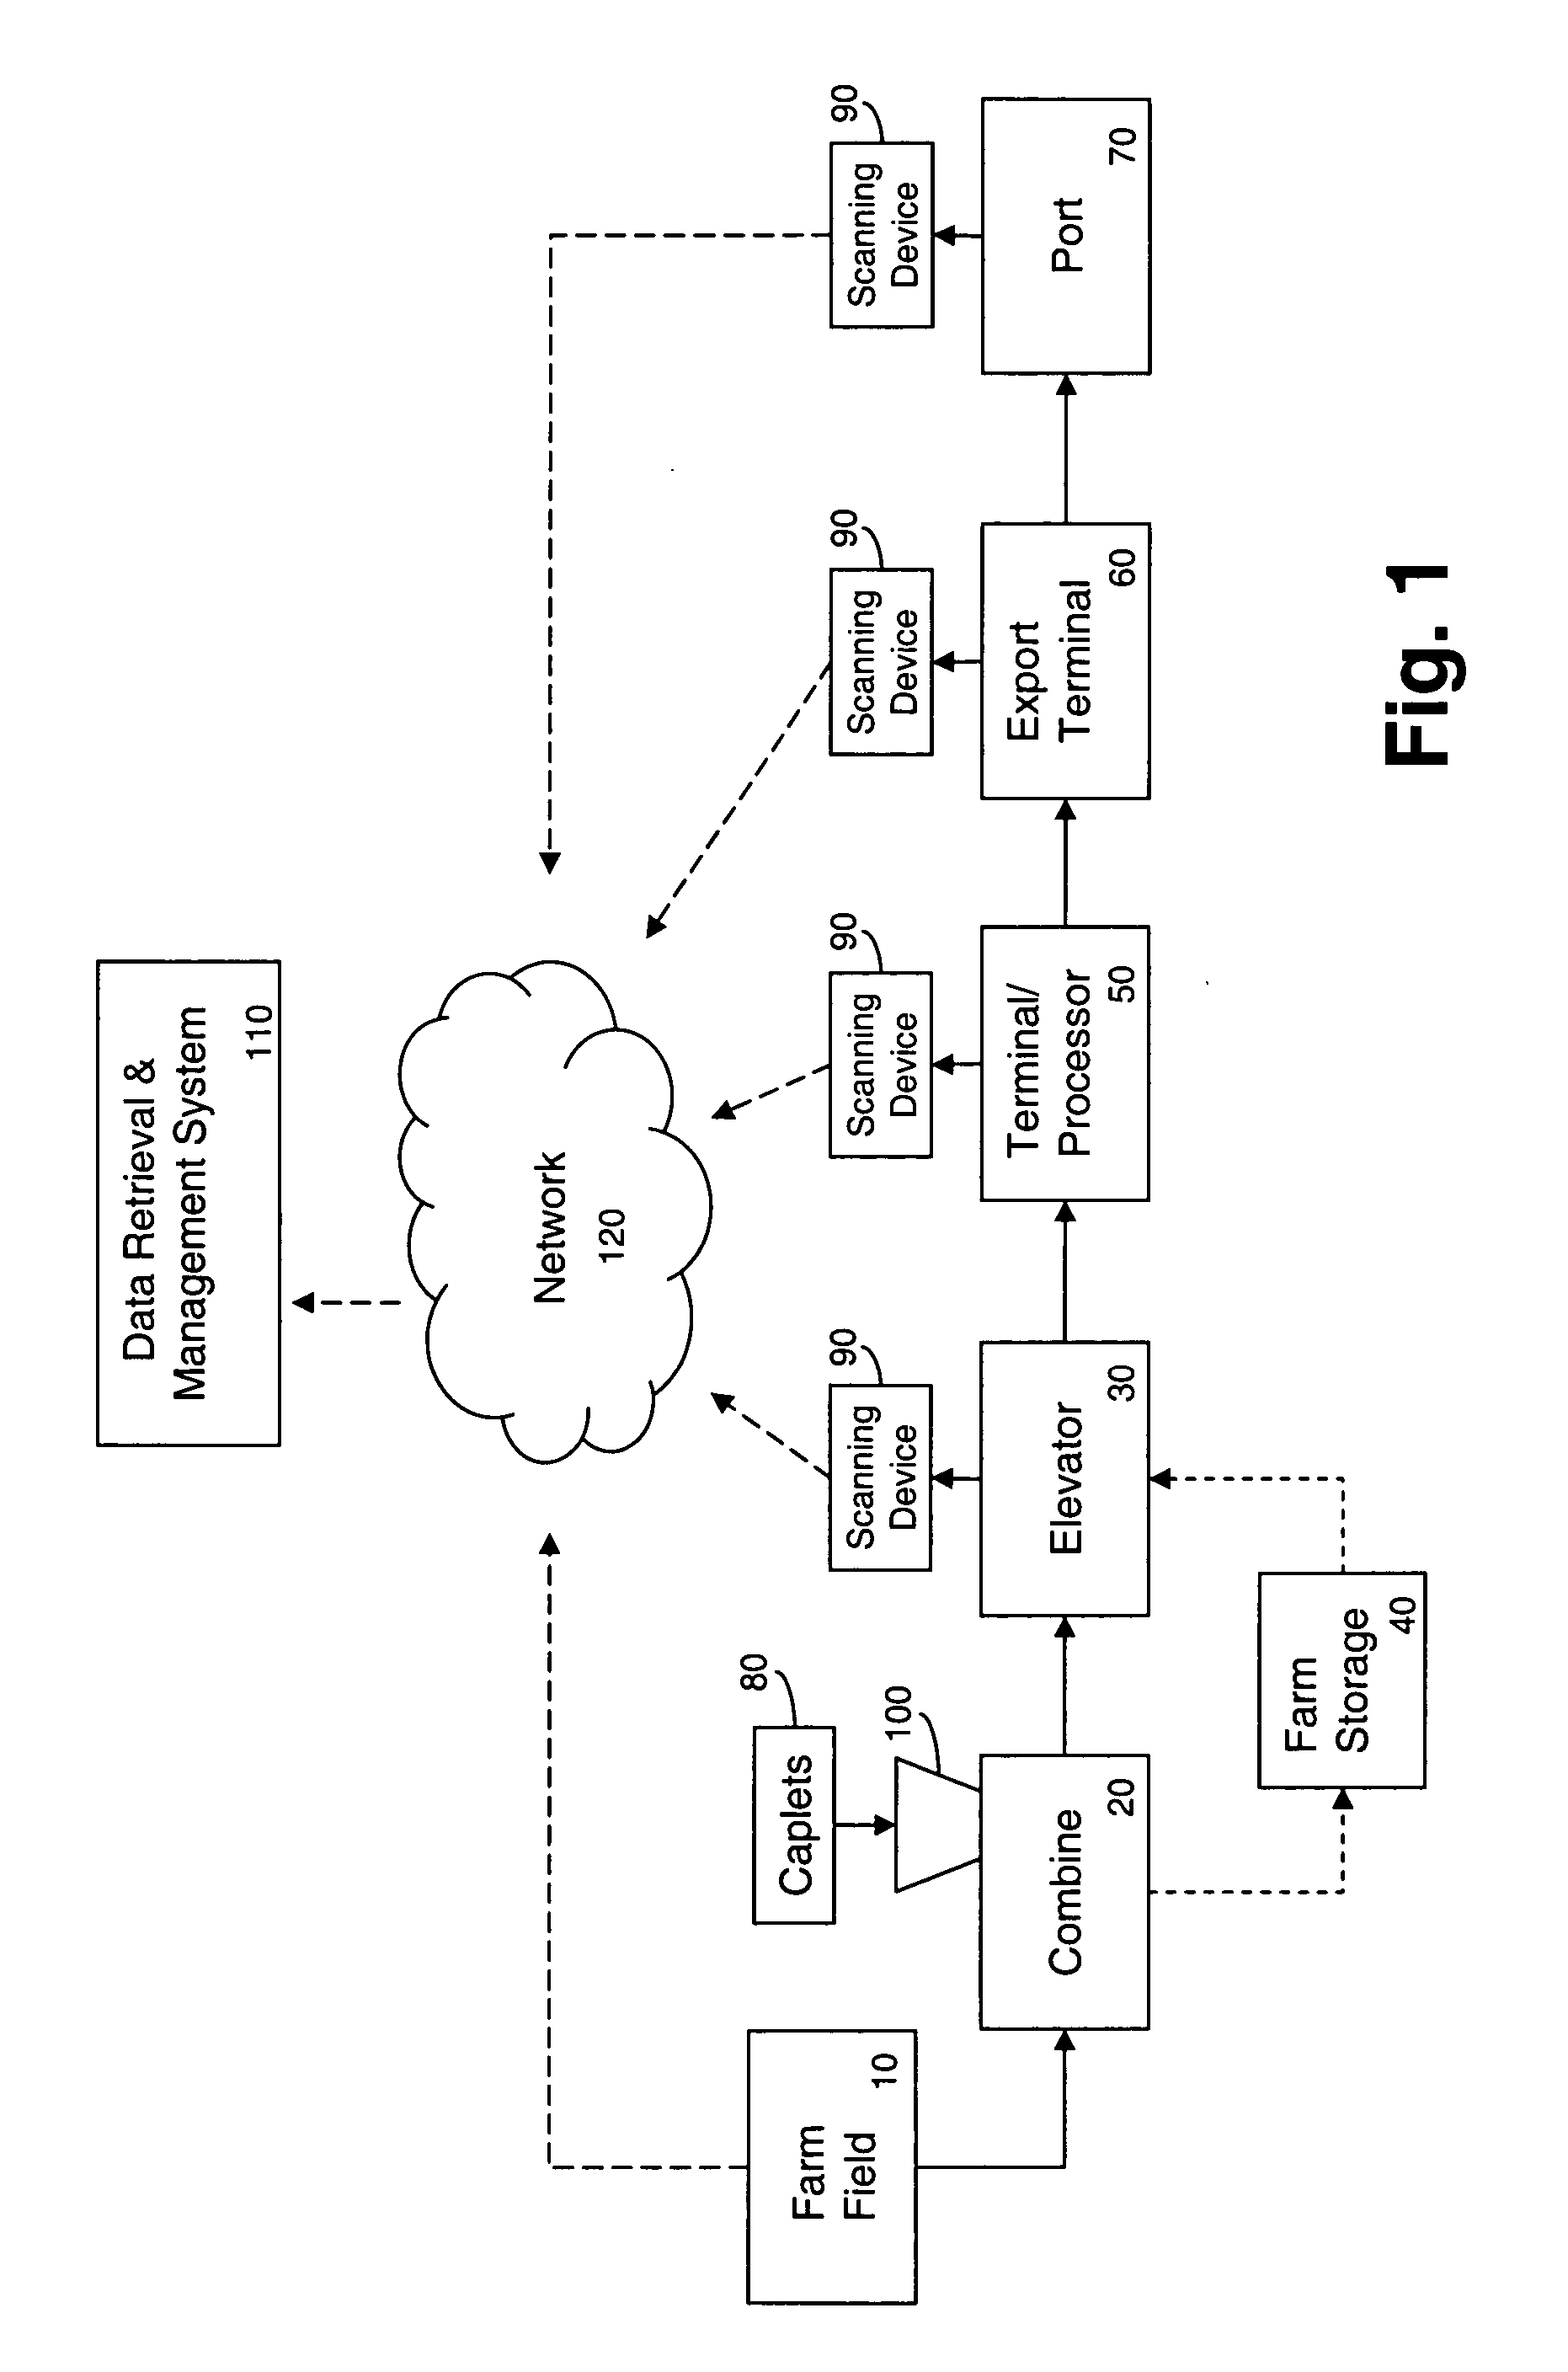 System and method for tracing agricultural commodities